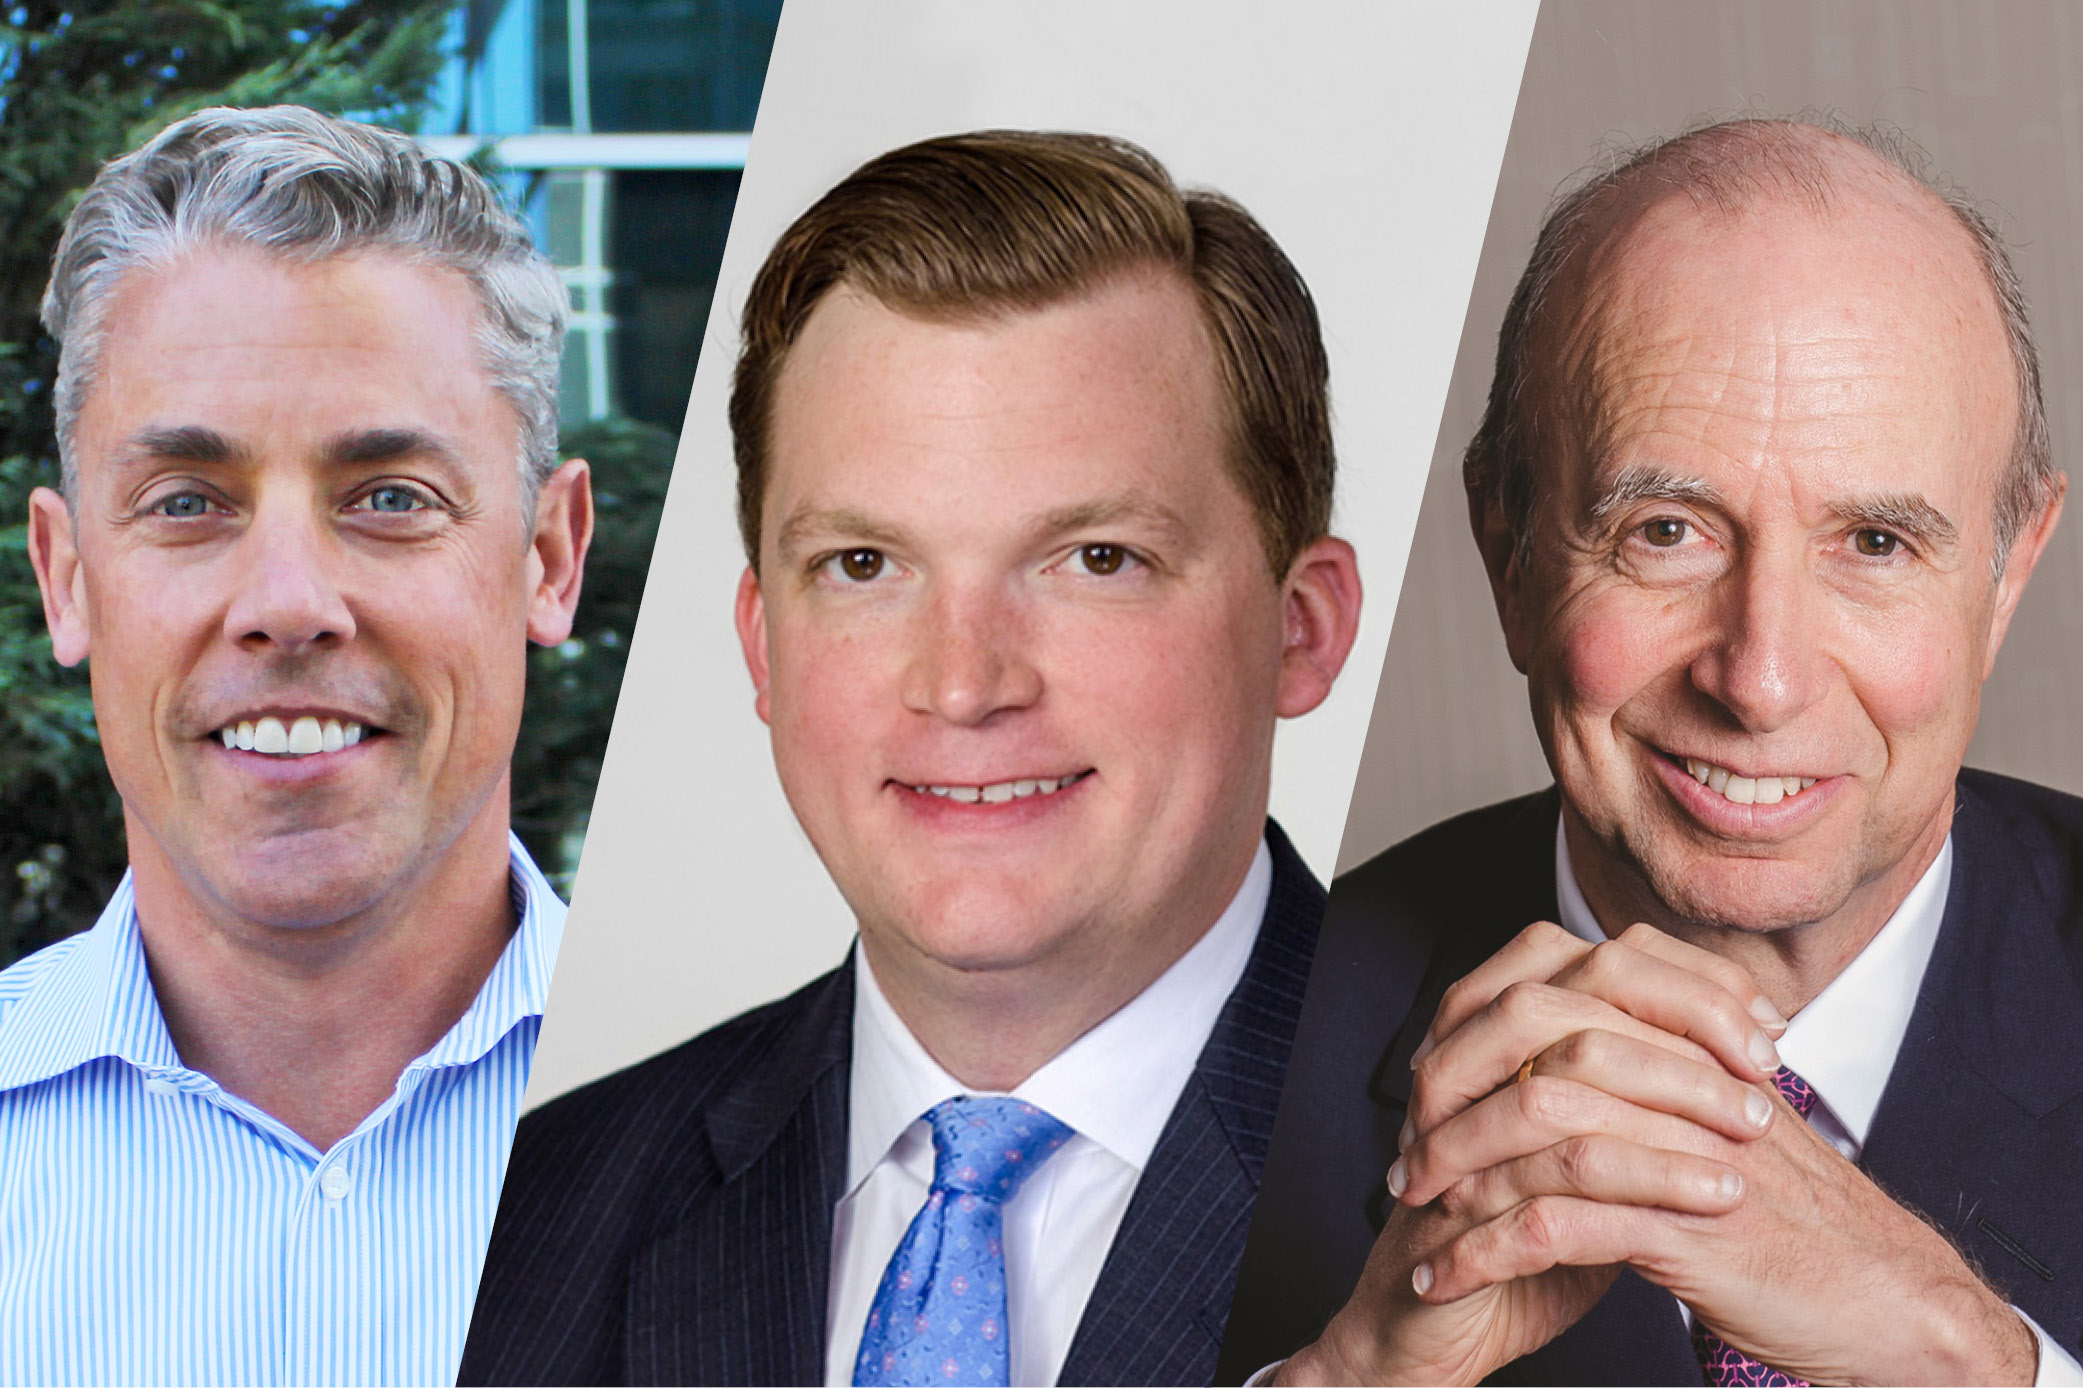 Relation Insurance Services Adds Three Industry Leaders as Company Ramps for Growth